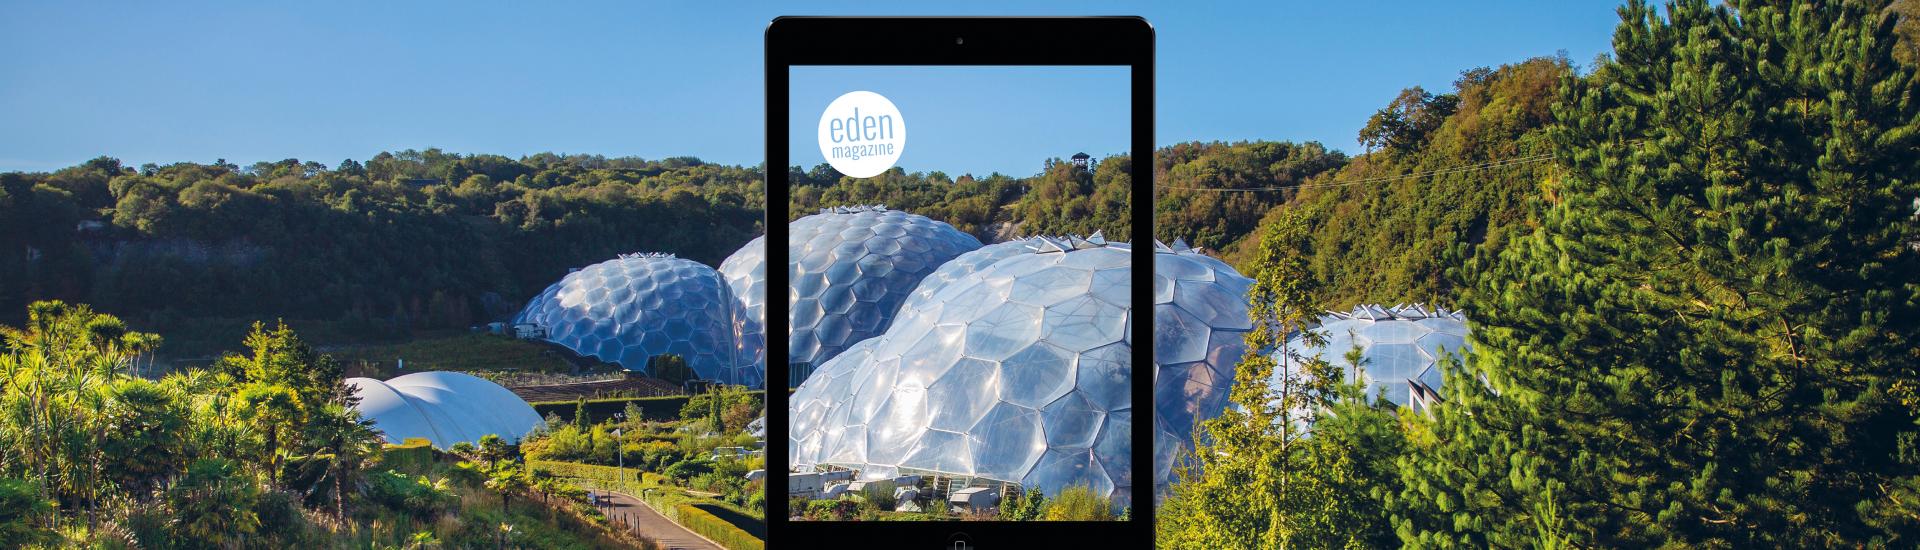 iPad in front of the Eden Project